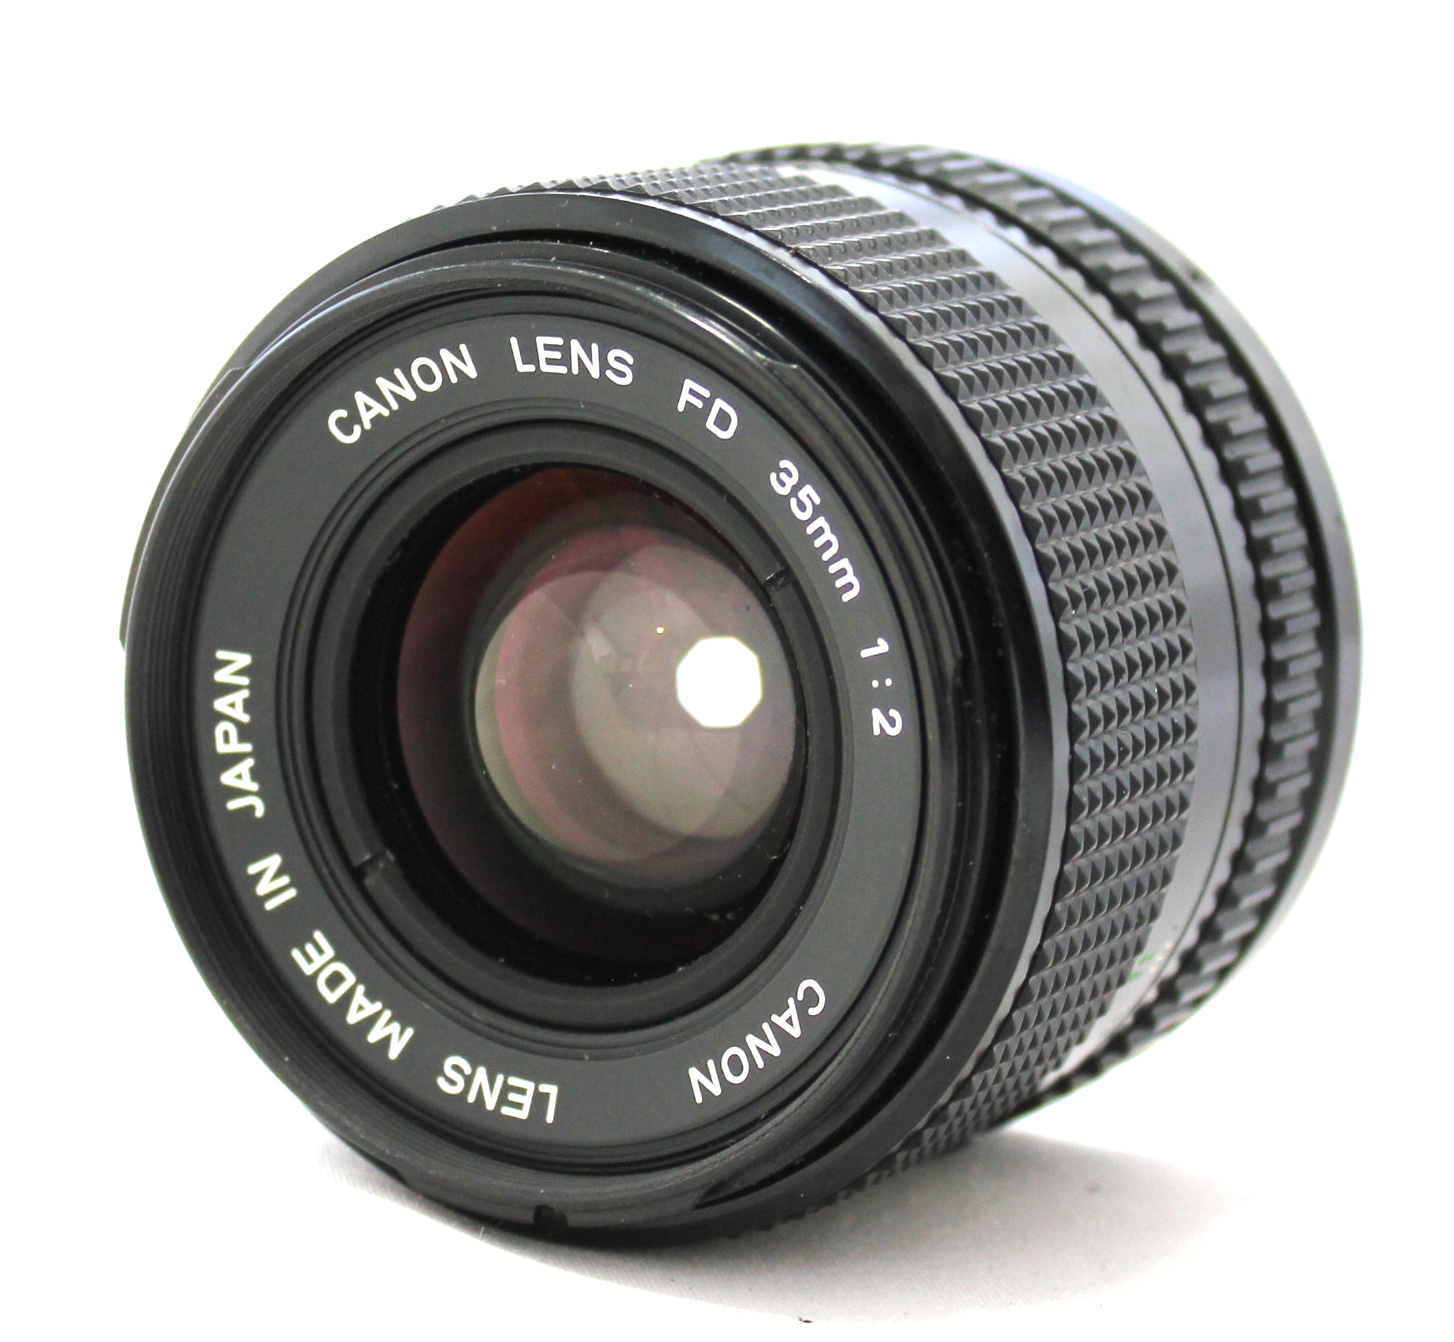 Japan Used Camera Shop | Canon New FD NFD 35mm F/2 Wide Angle MF Lens from Japan